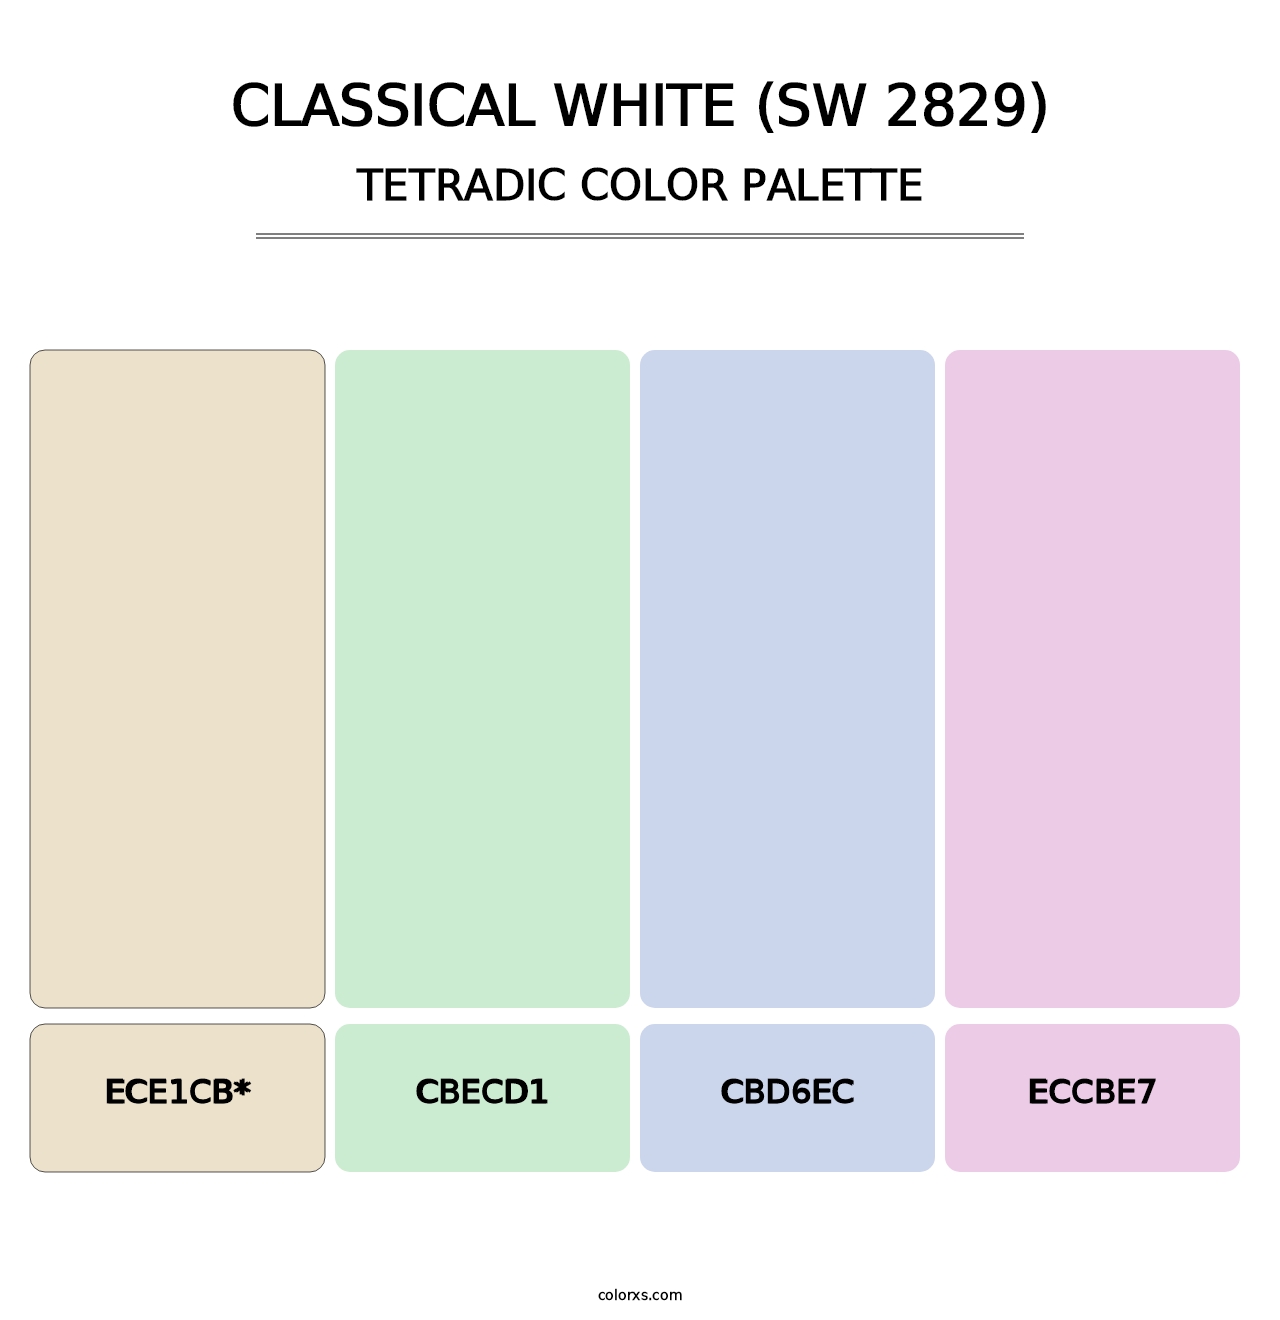 Classical White (SW 2829) - Tetradic Color Palette